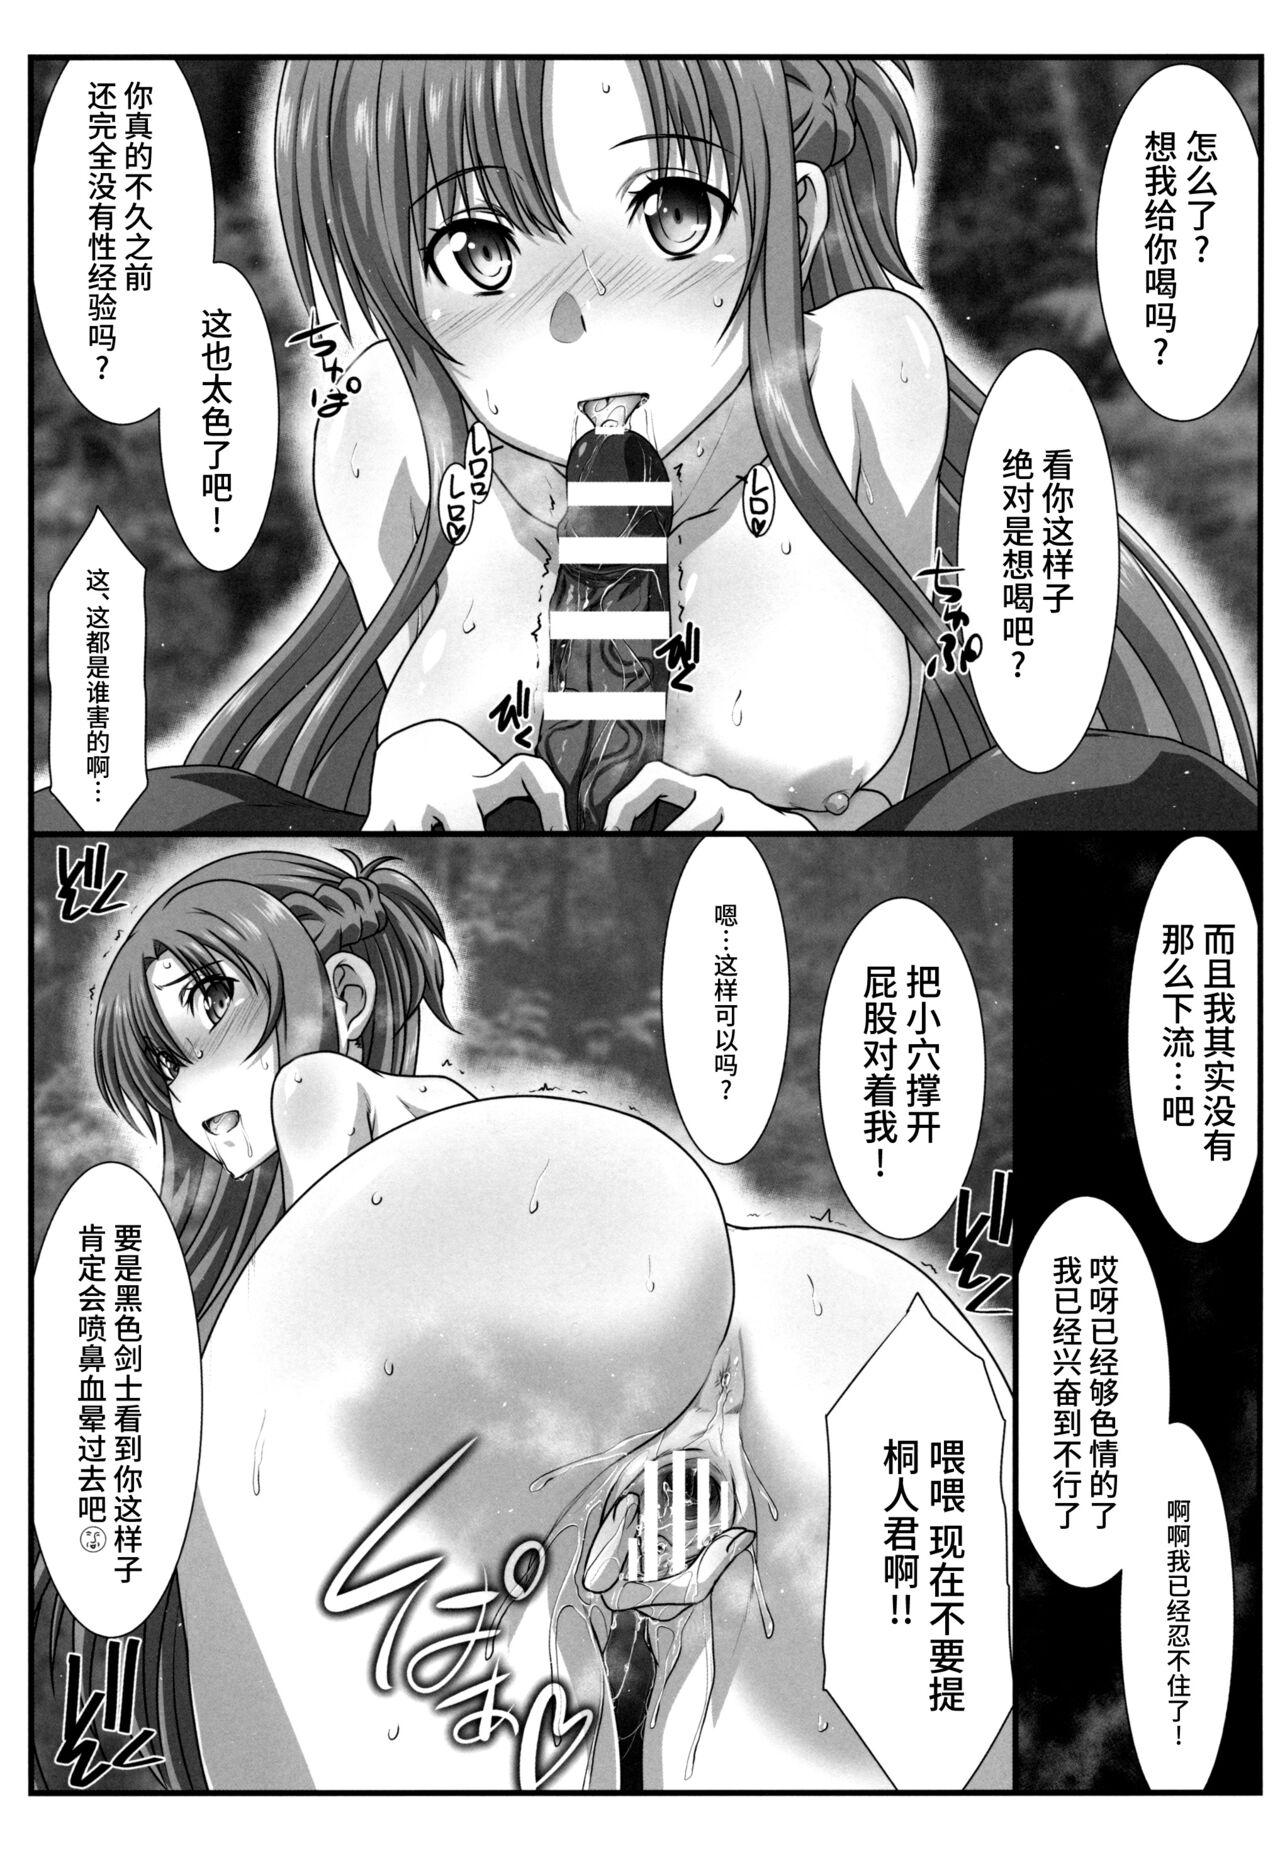 Pussy Play Astral Bout Ver. 45 - Sword art online Amazing - Page 8